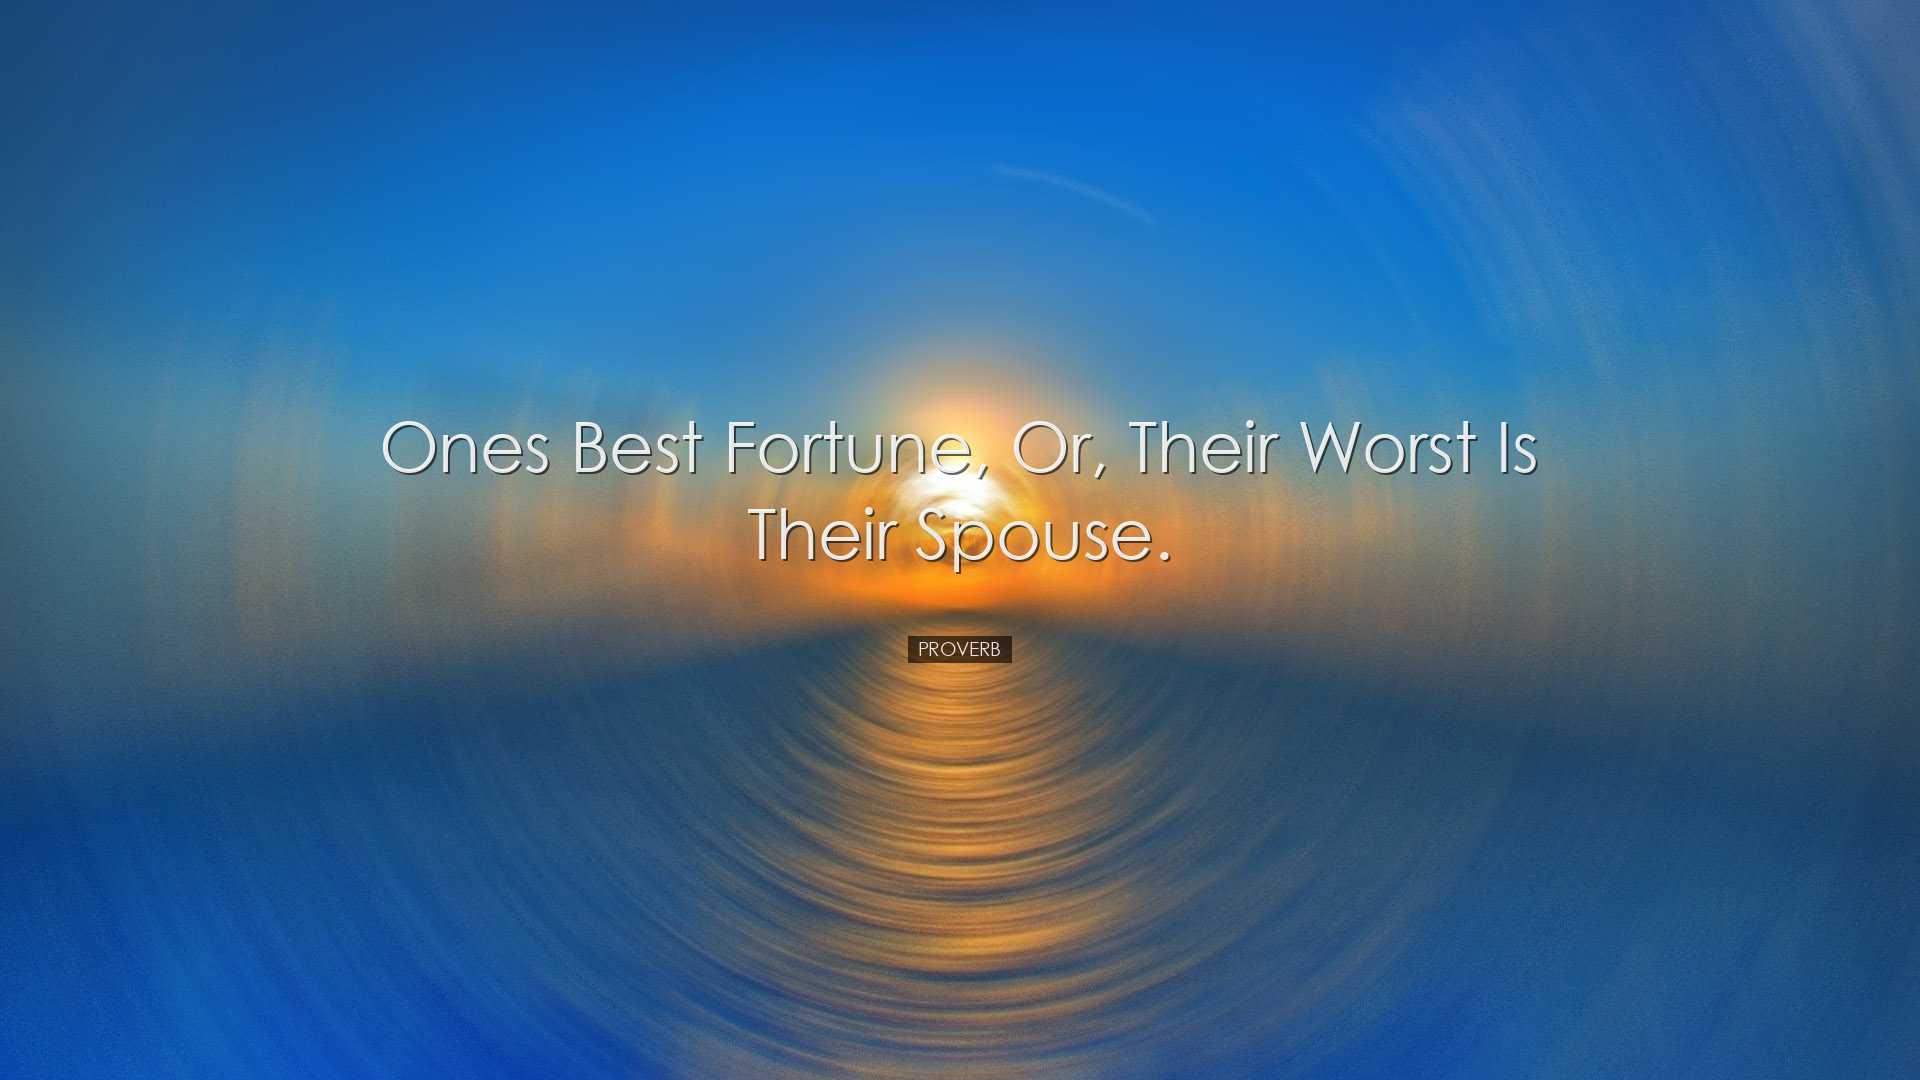 Ones best fortune, or, their worst is their spouse. - Proverb